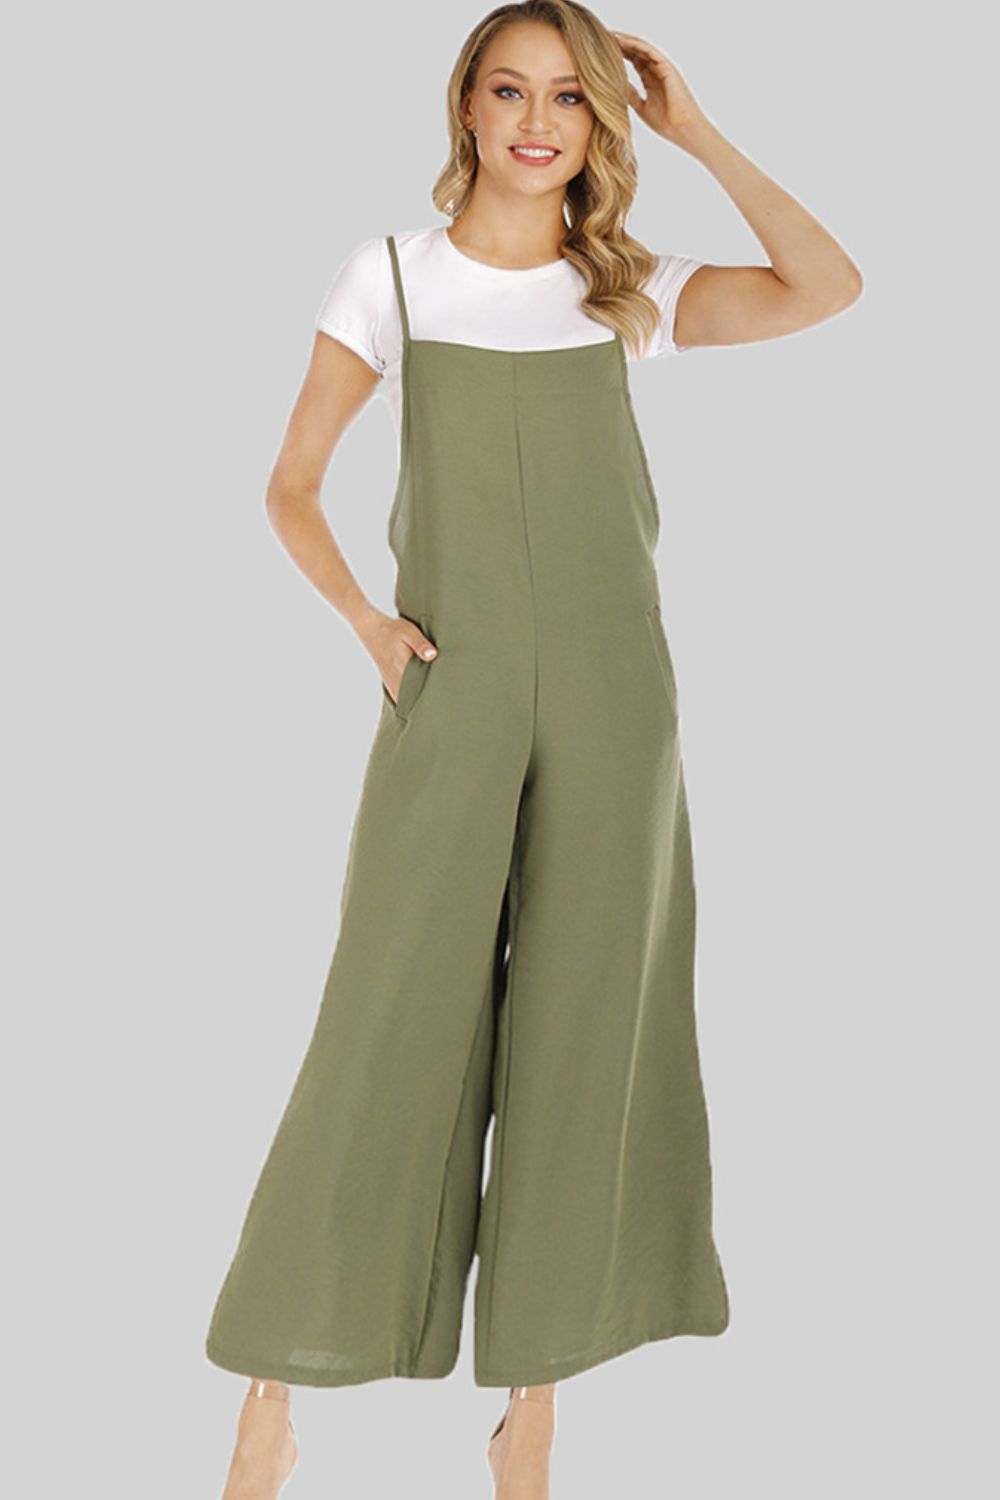 Ophelia Overalls | 3 colors |